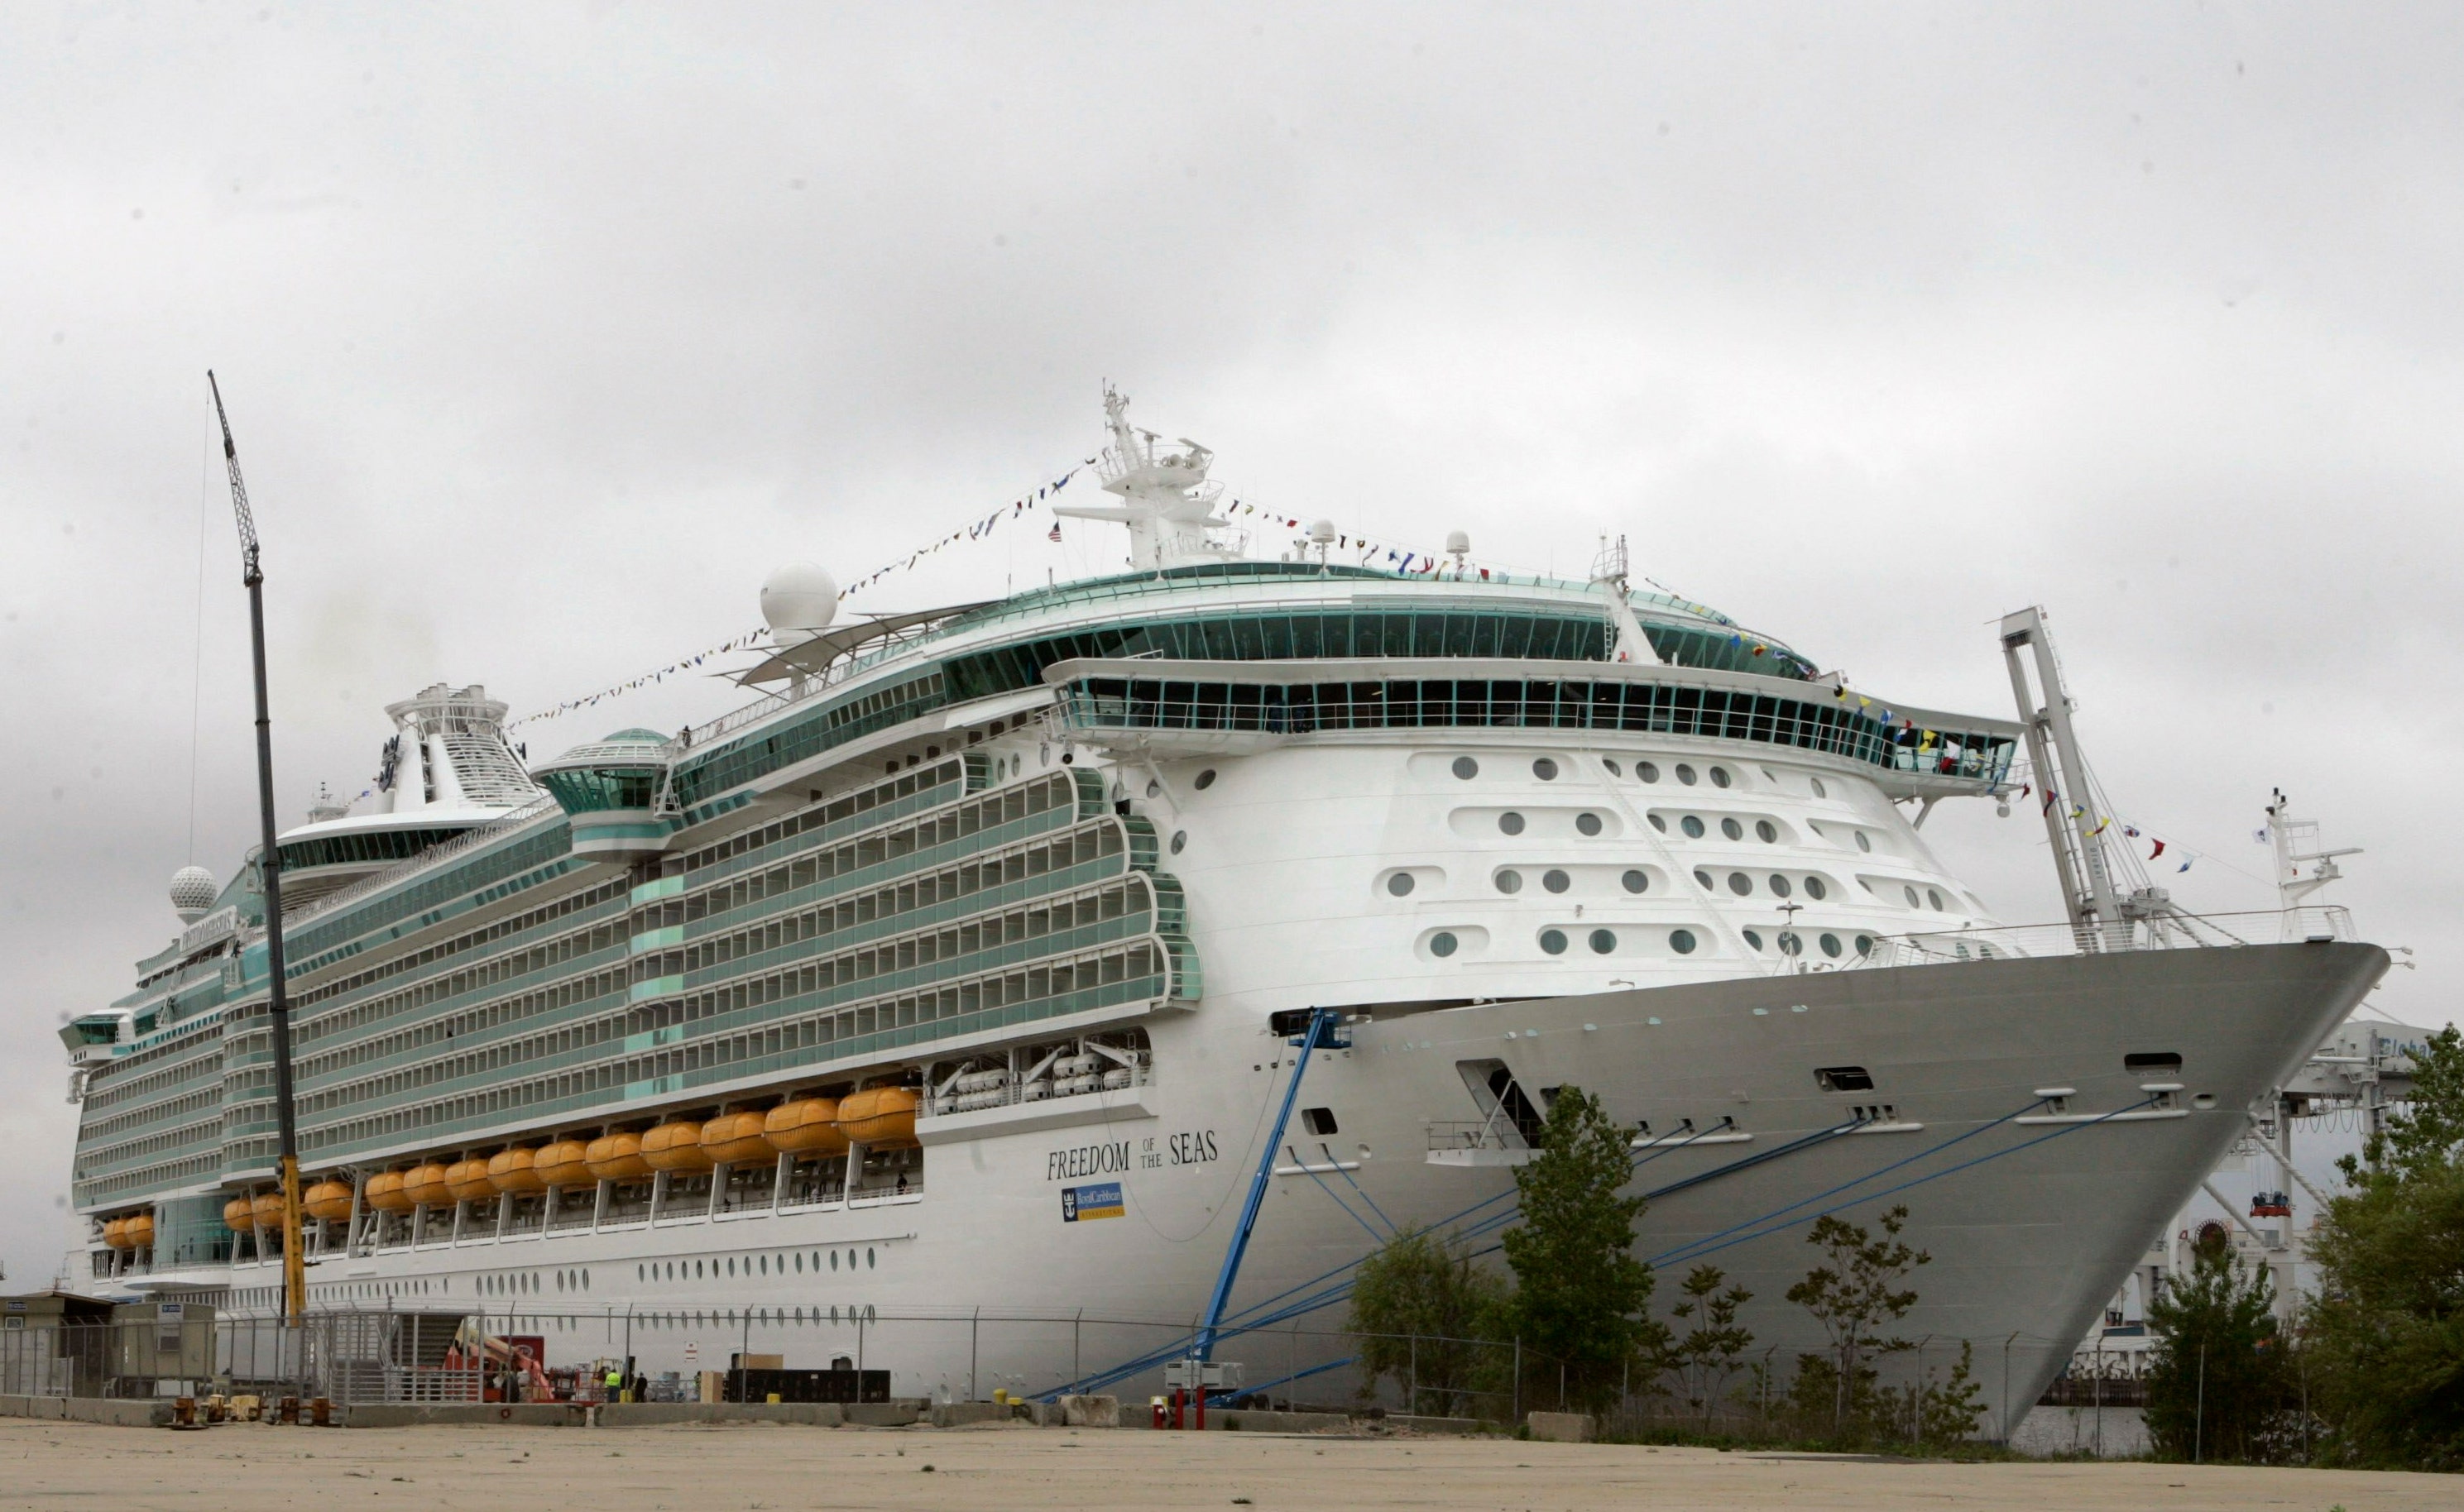 Royal Caribbean cruise line accused of destroying evidence by family of toddler who fell to her death